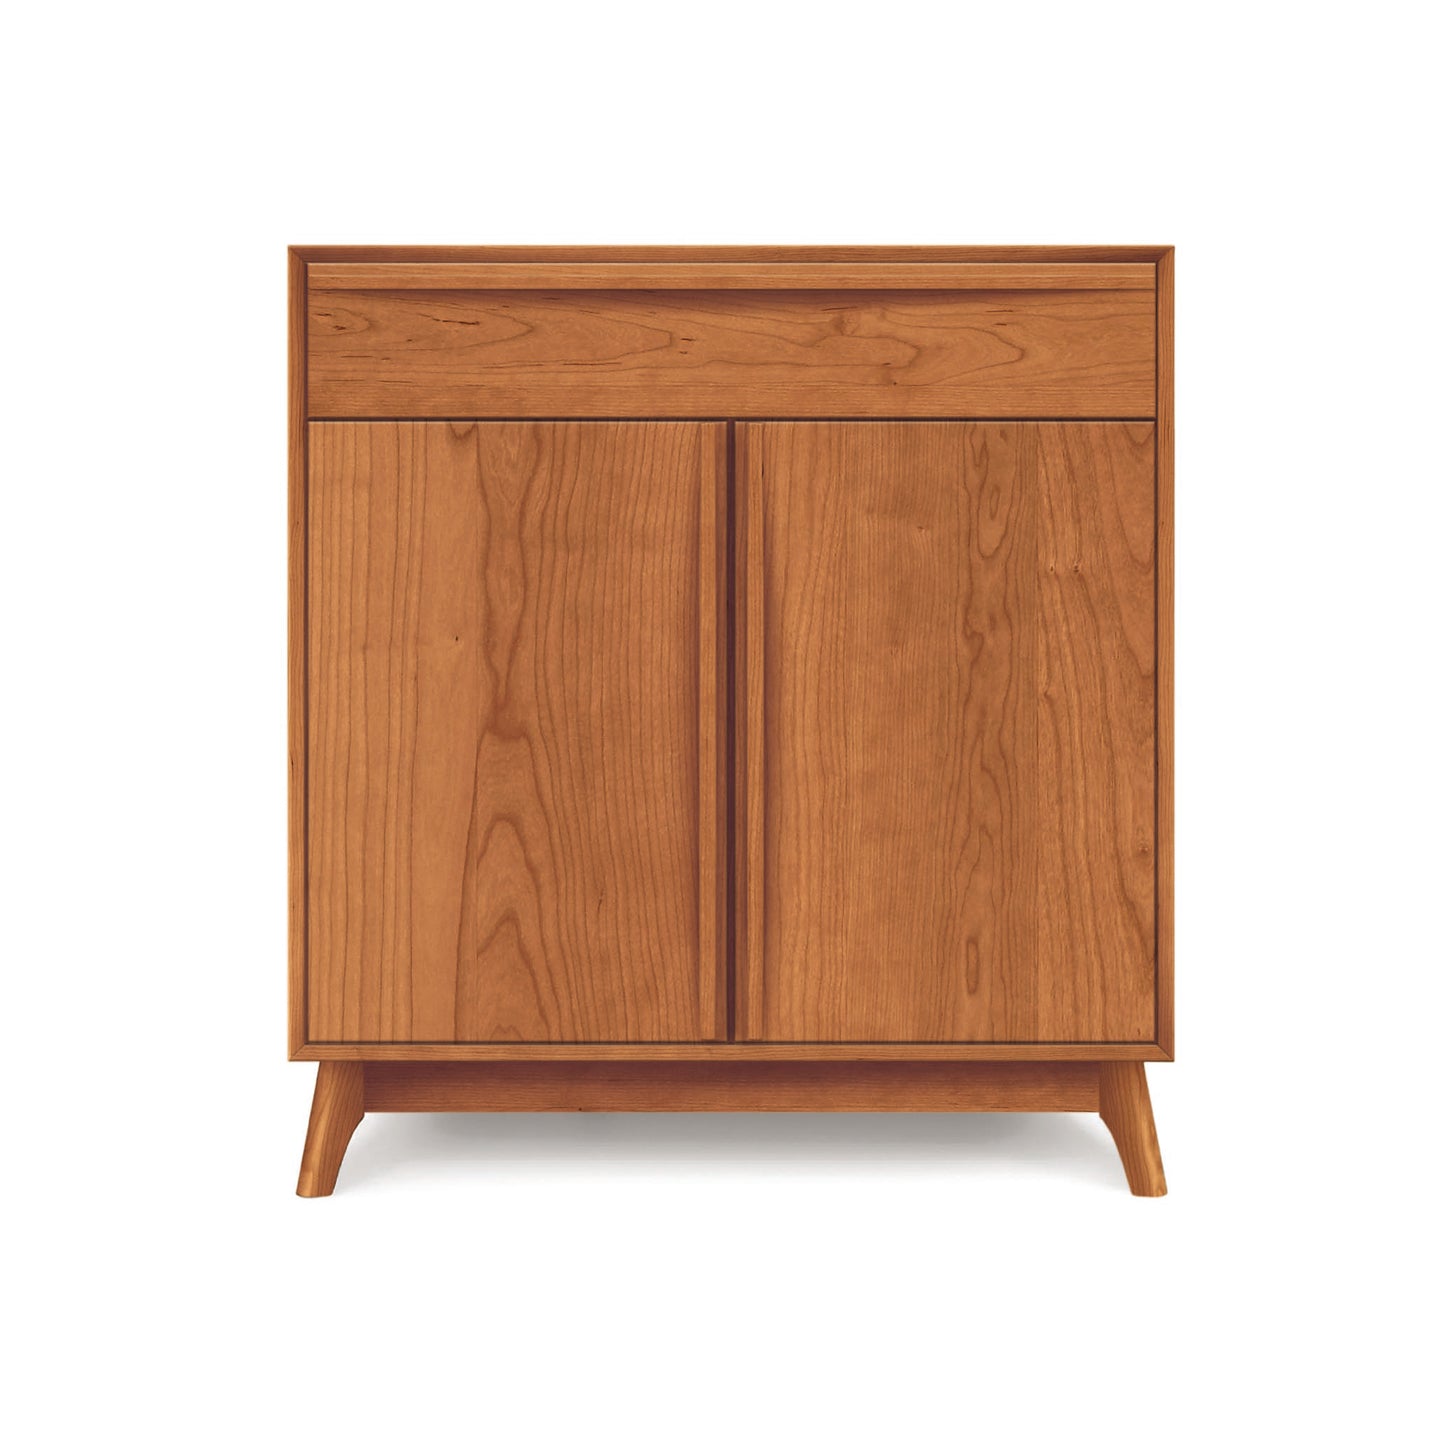 A Catalina 1-Drawer, 2-Door Buffet with tapered legs against a white background.